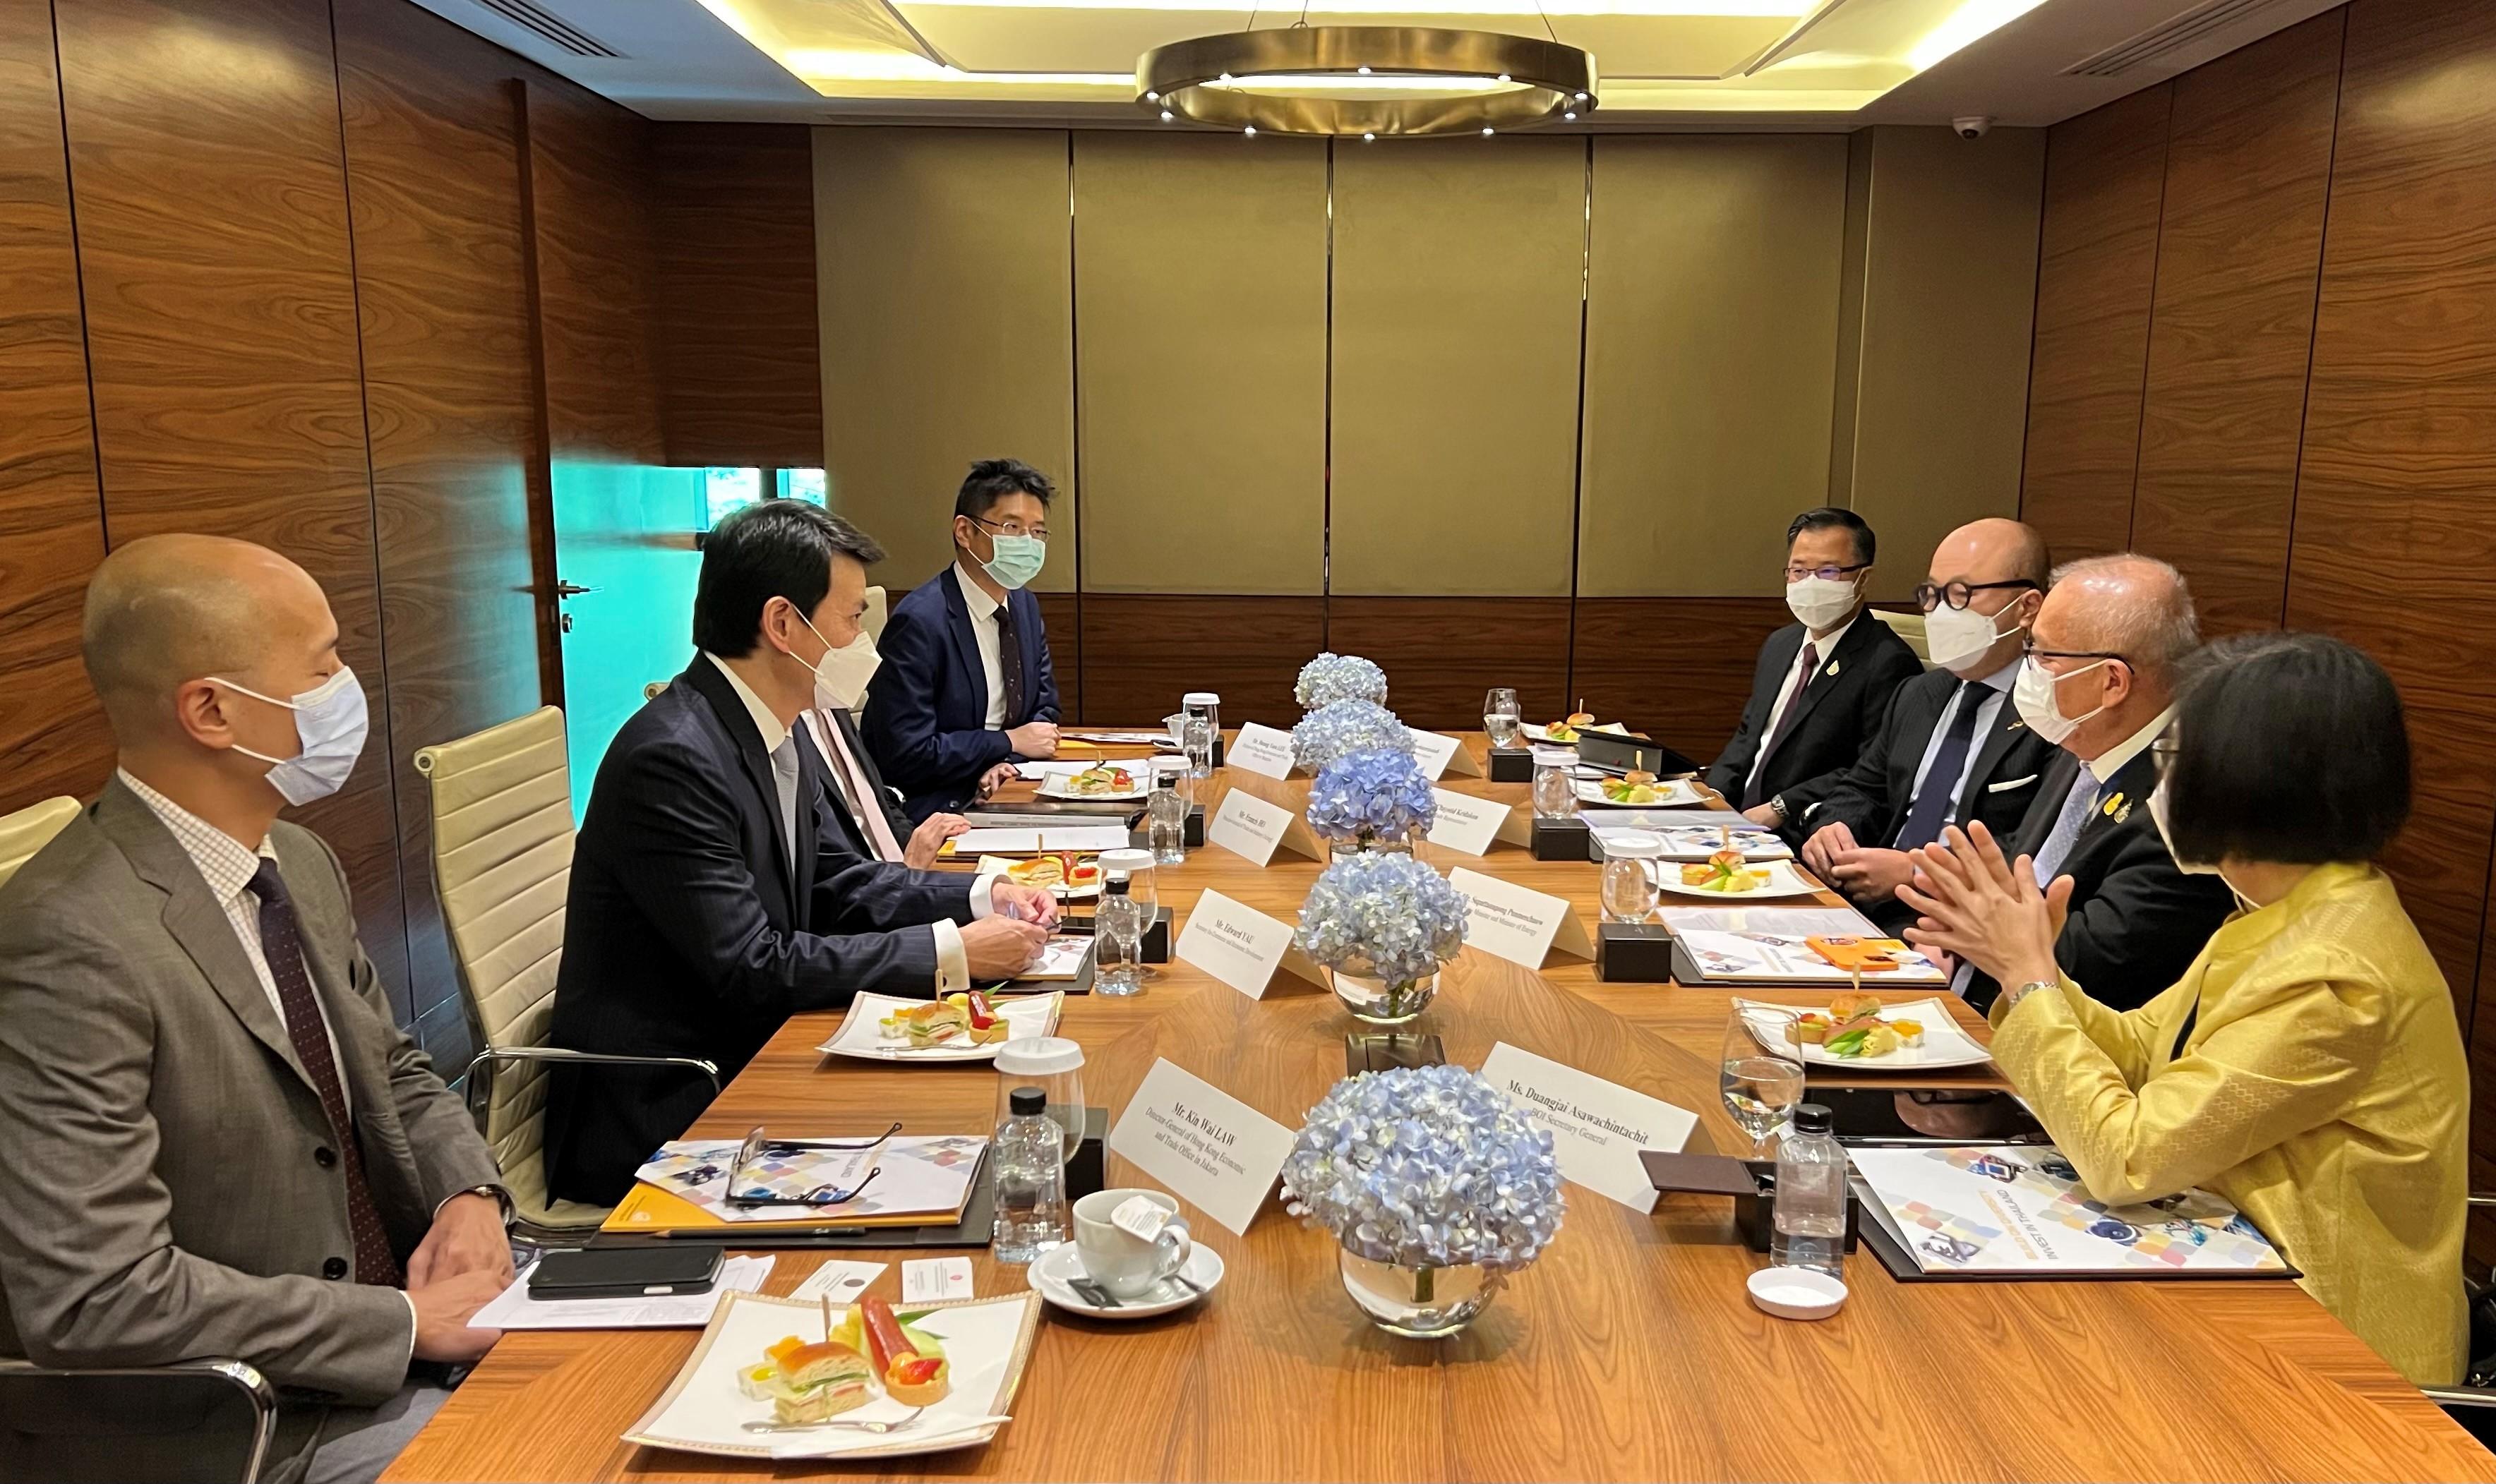 The Secretary for Commerce and Economic Development, Mr Edward Yau, continued to promote Hong Kong's business opportunities on his visit to Bangkok, Thailand, today (May 20). Photo shows Mr Yau (second left) exchanging views with the Deputy Prime Minister and Minister of Energy of Thailand, Mr Supattanapong Punmeechaow (second right), on the economic and trade situation in the region.